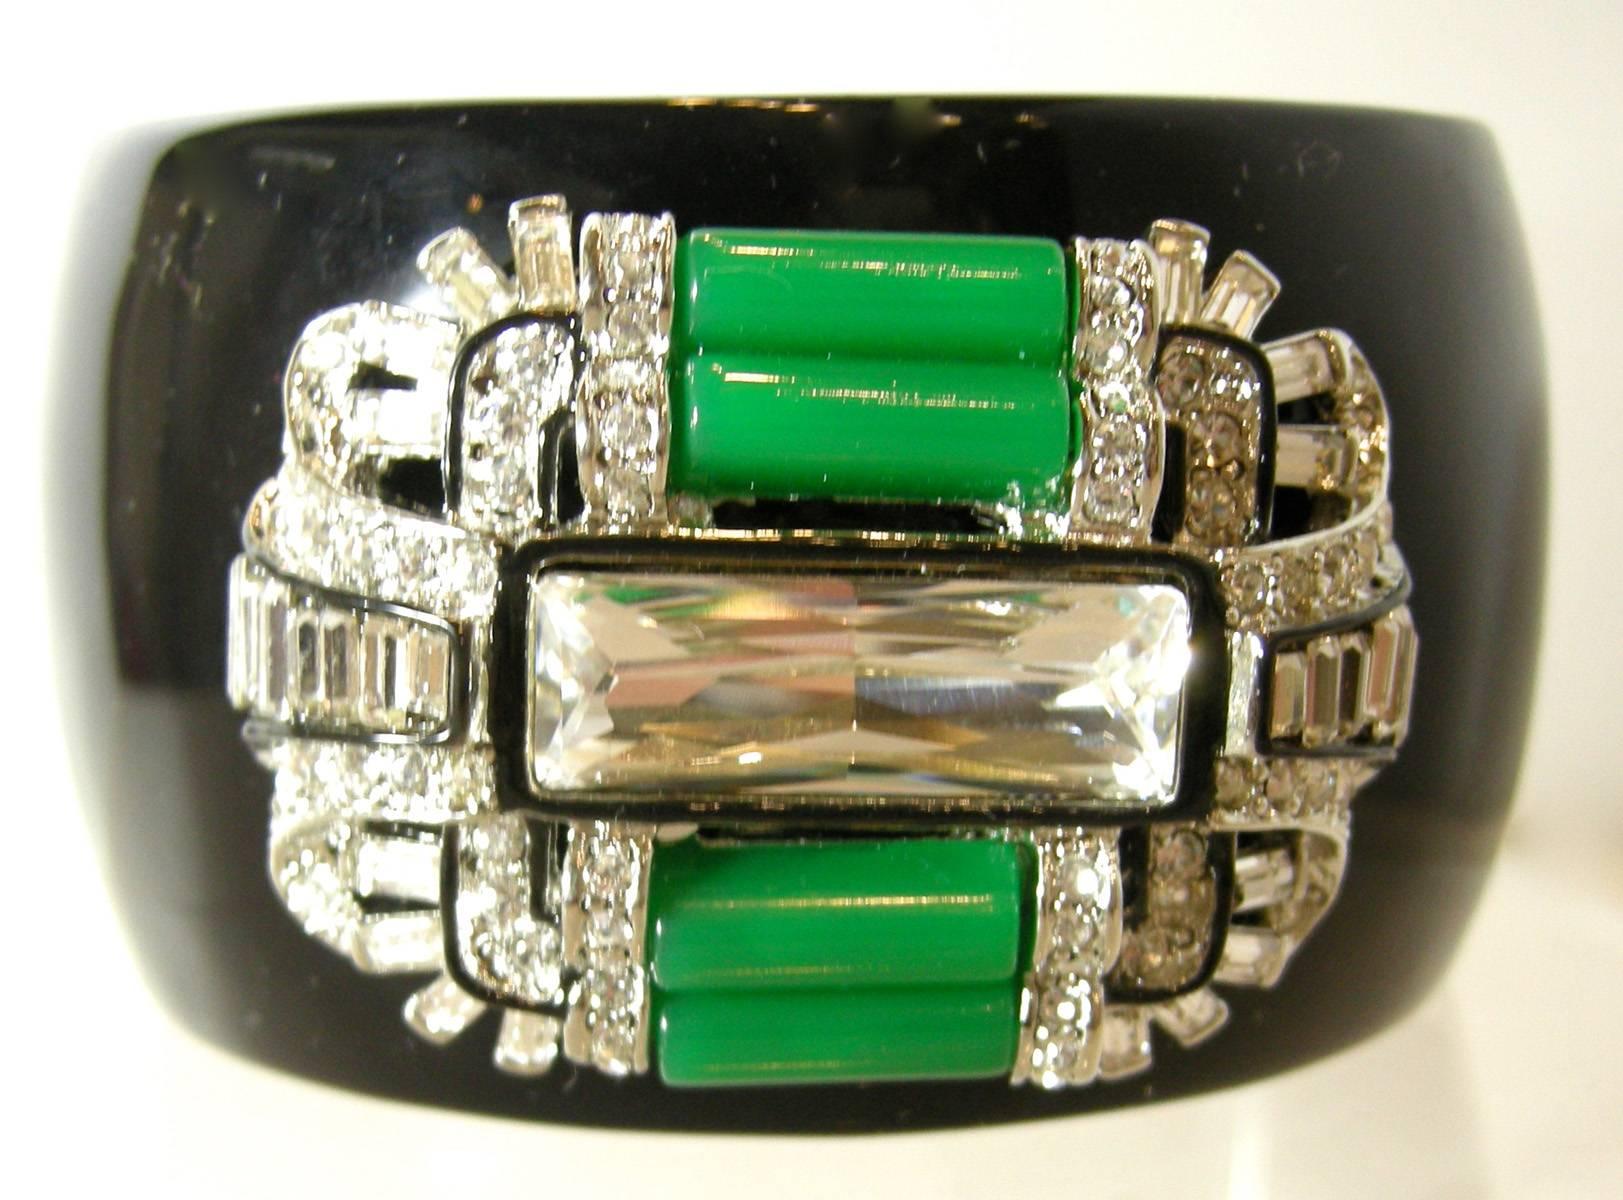 This Kenneth Jay Lane deco style clamper bracelet features faux jade rods with crystal accents on a black enameled setting. This clamper bracelet has spring-closure and it measures 6-3/4” x 1-3/4”.  It is signed “Kenneth Lane” and is in excellent